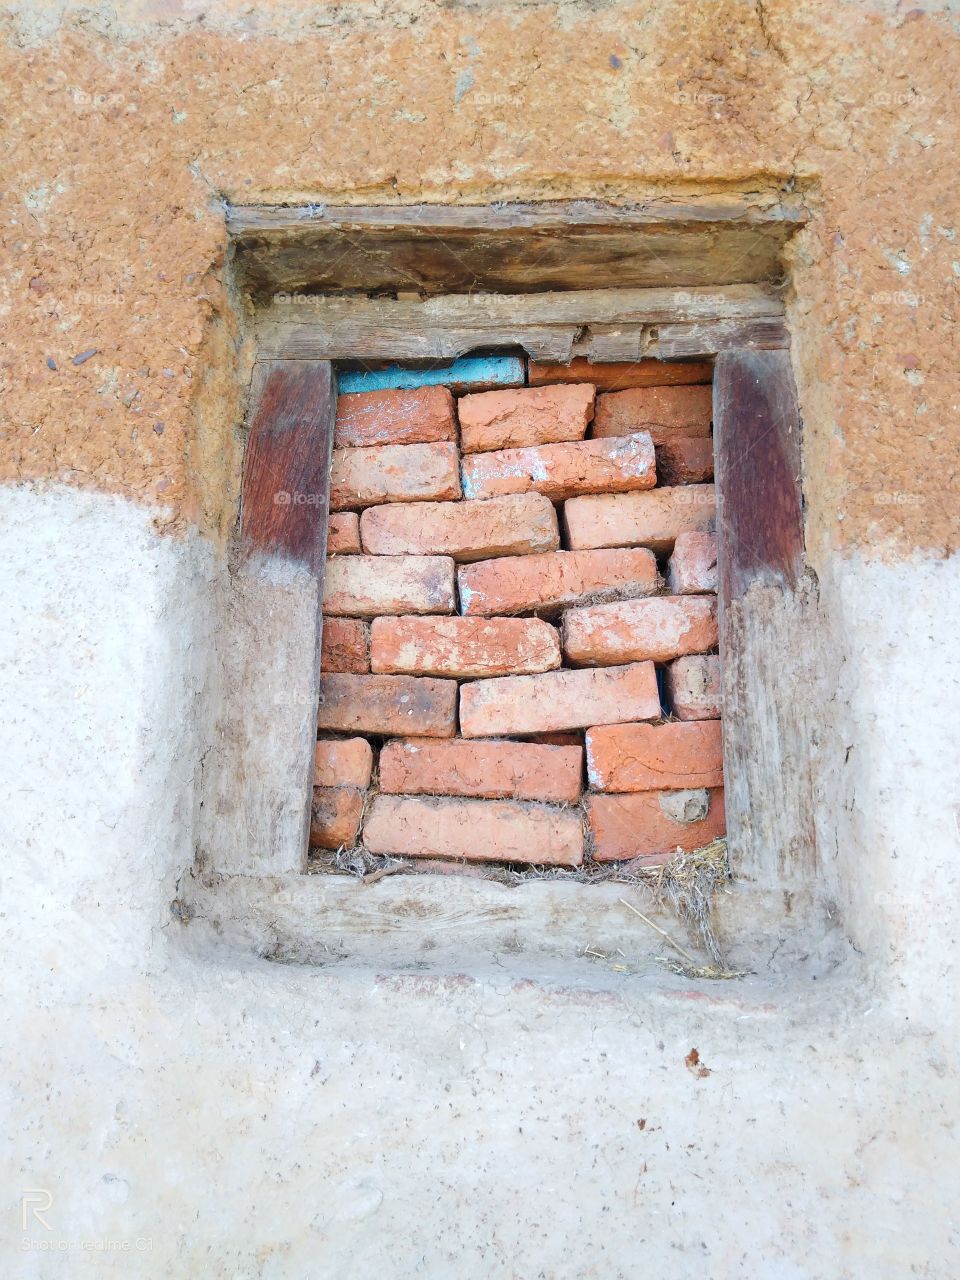 wooden window that is closed with bricks